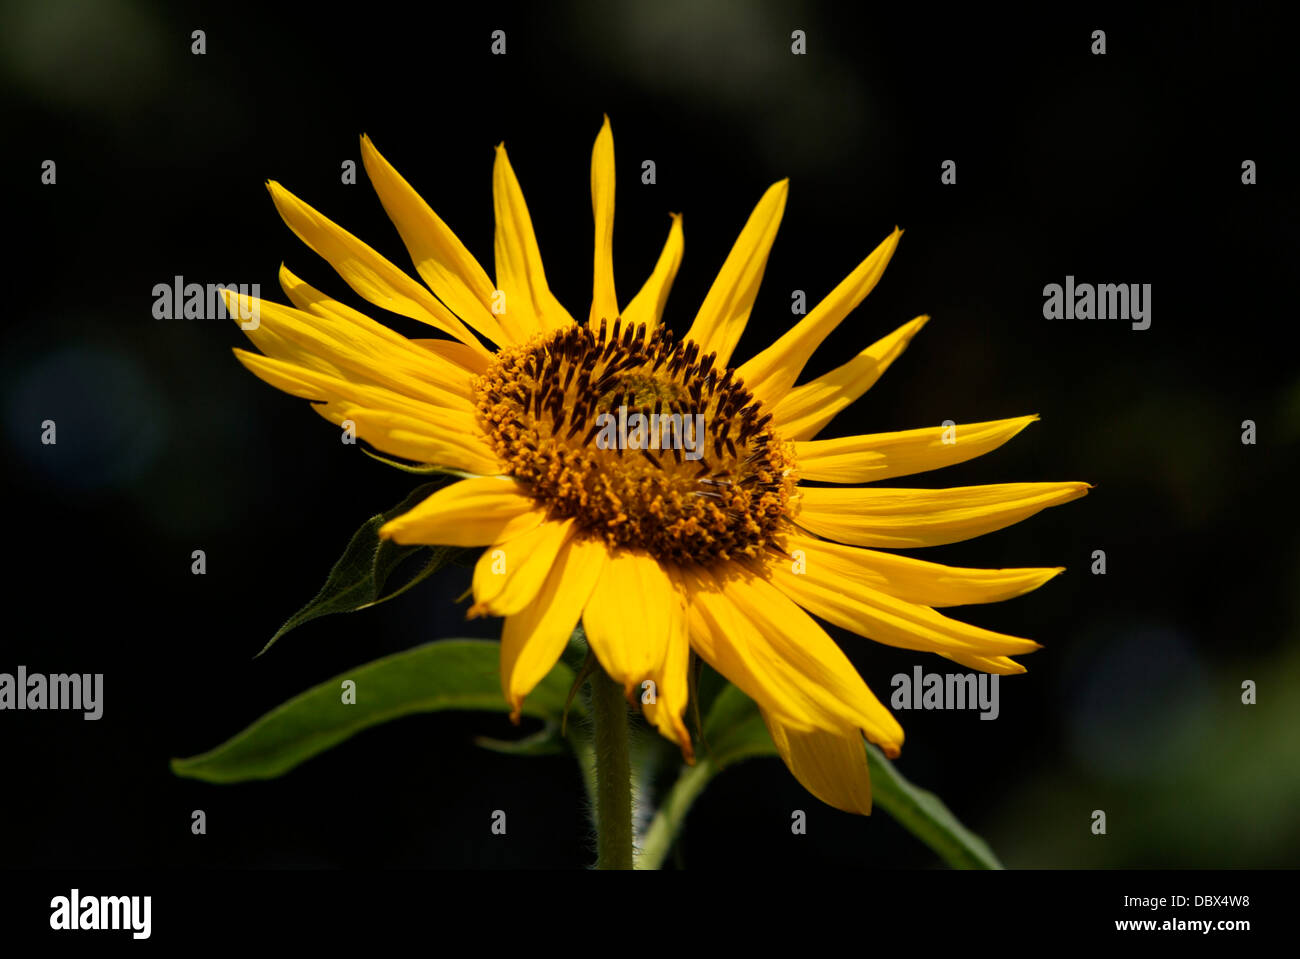 CLOSE-UP OF A SUNFLOWER Stock Photo